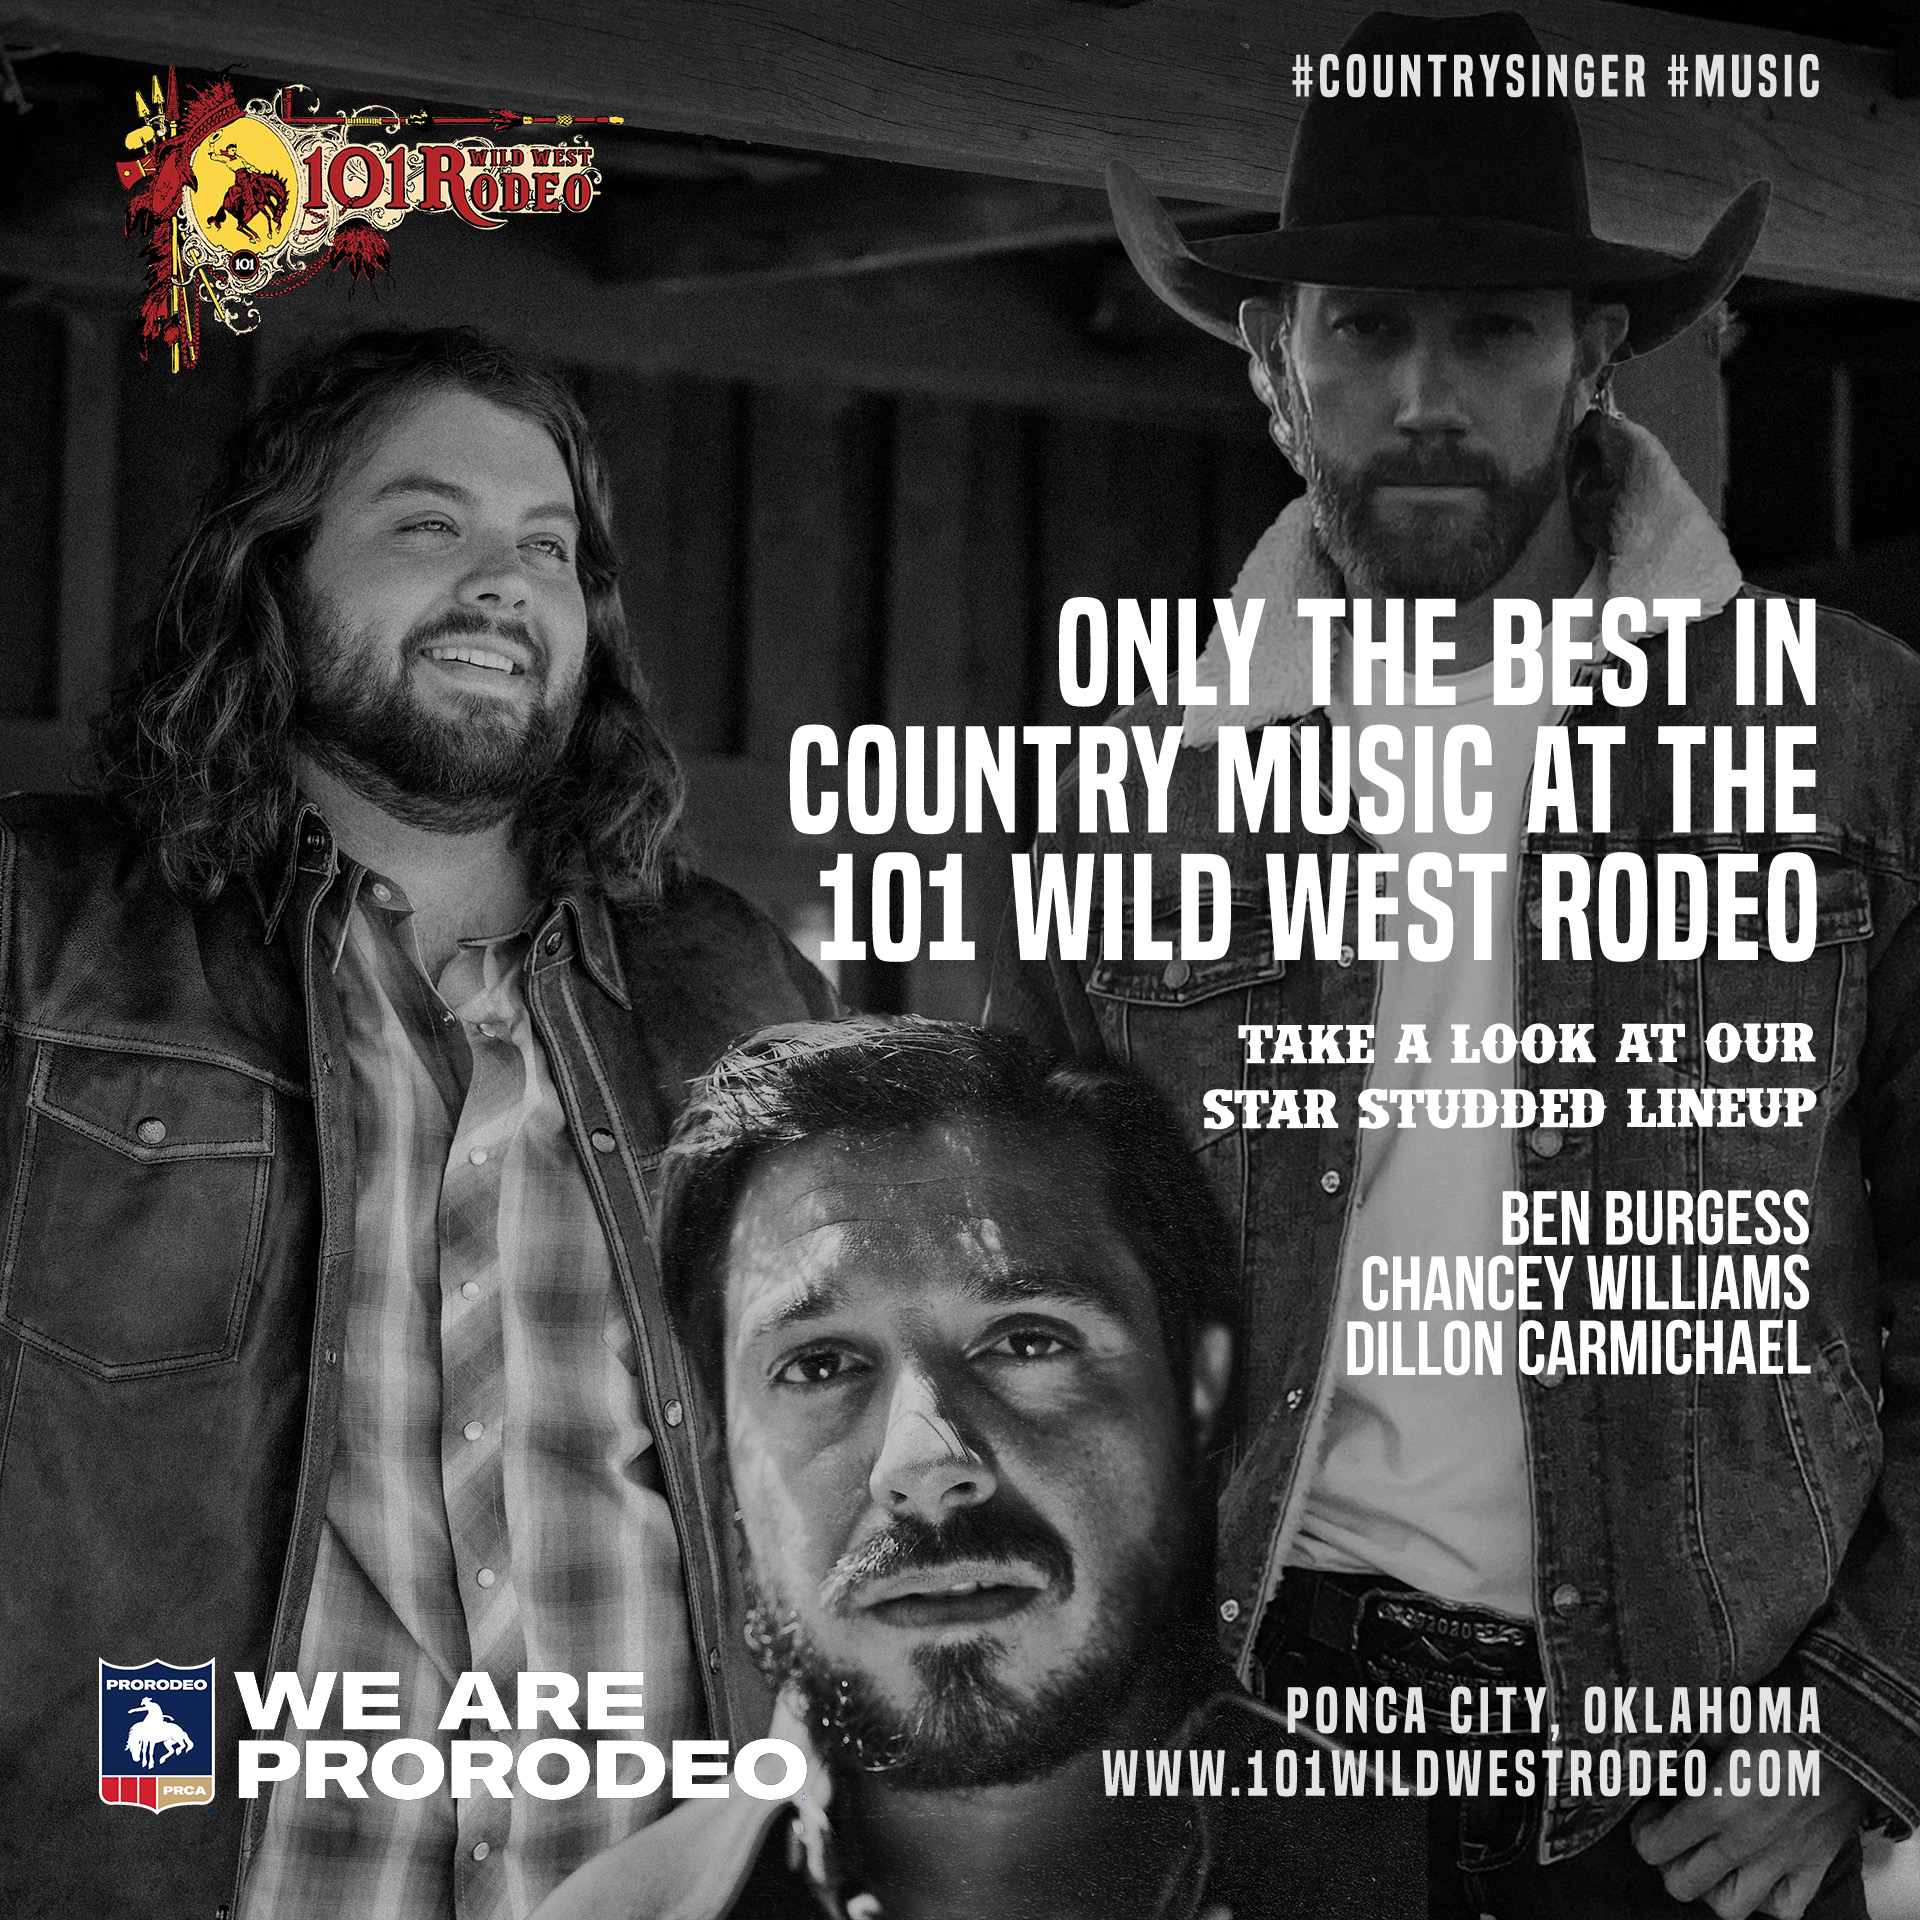 64th Annual 101 Wild West Rodeo Features 3 Amazing Musical Entertainers; Rodeo Tickets on Sale Now